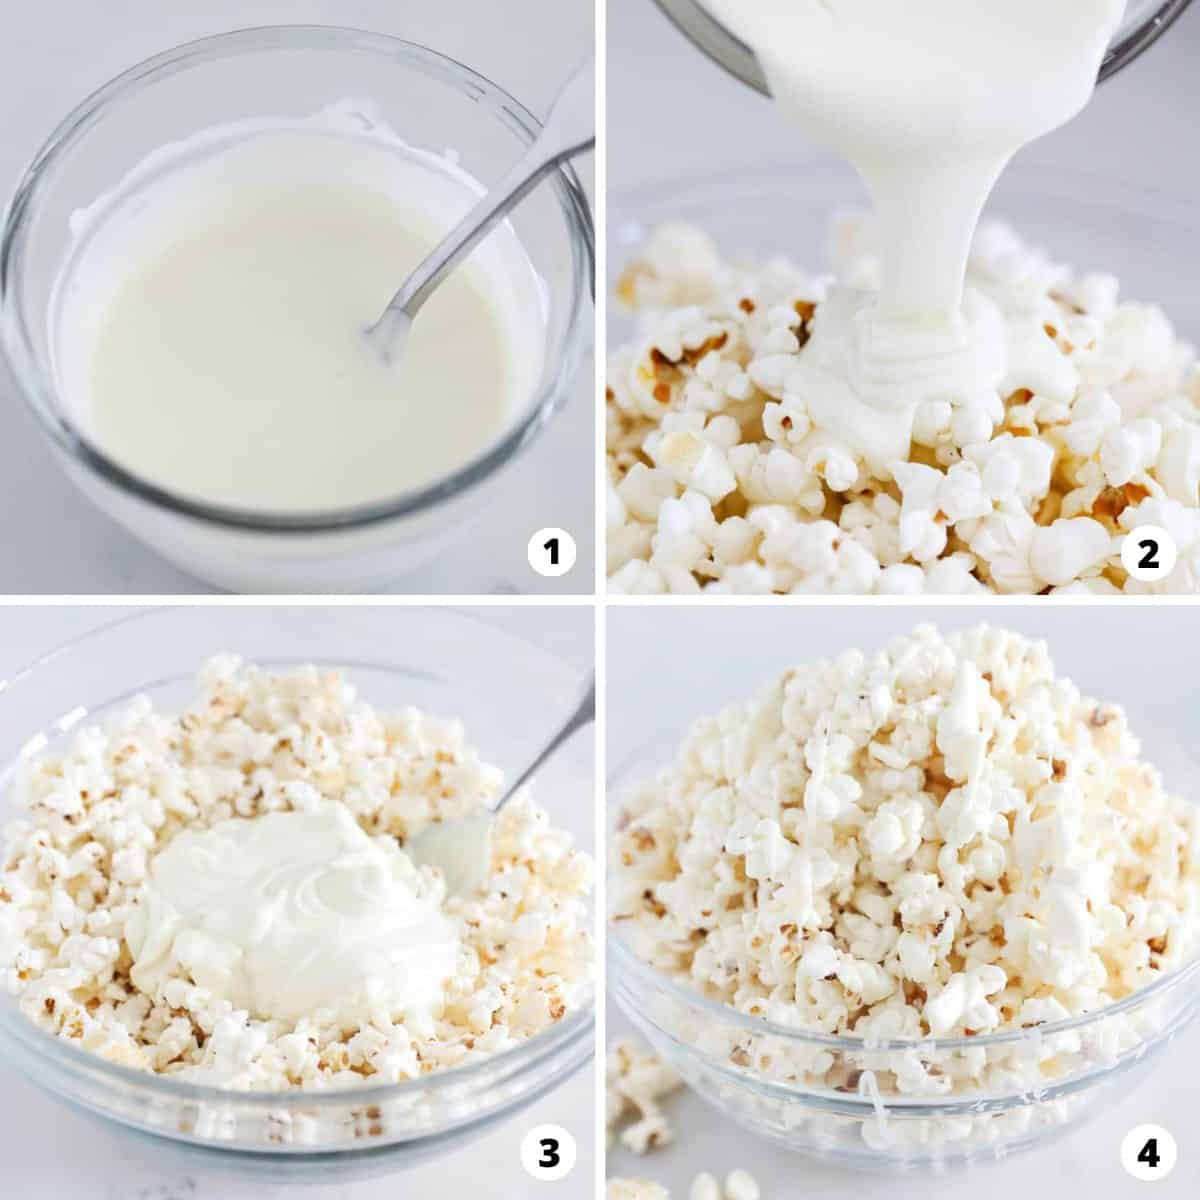 Step by step photo collage showing how to make white chocolate popcorn.